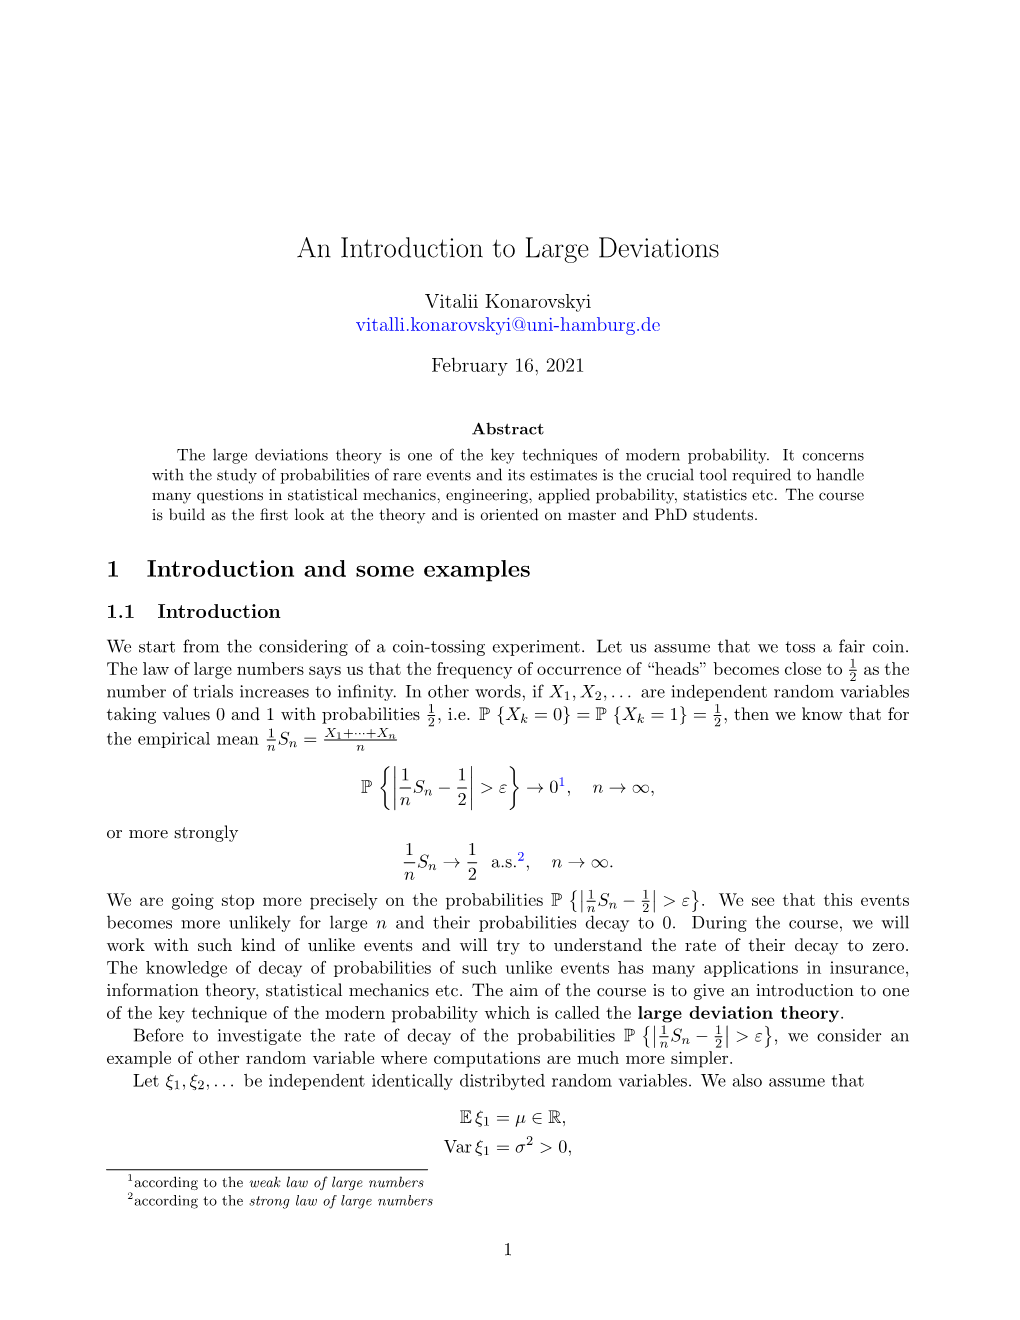 An Introduction to Large Deviations